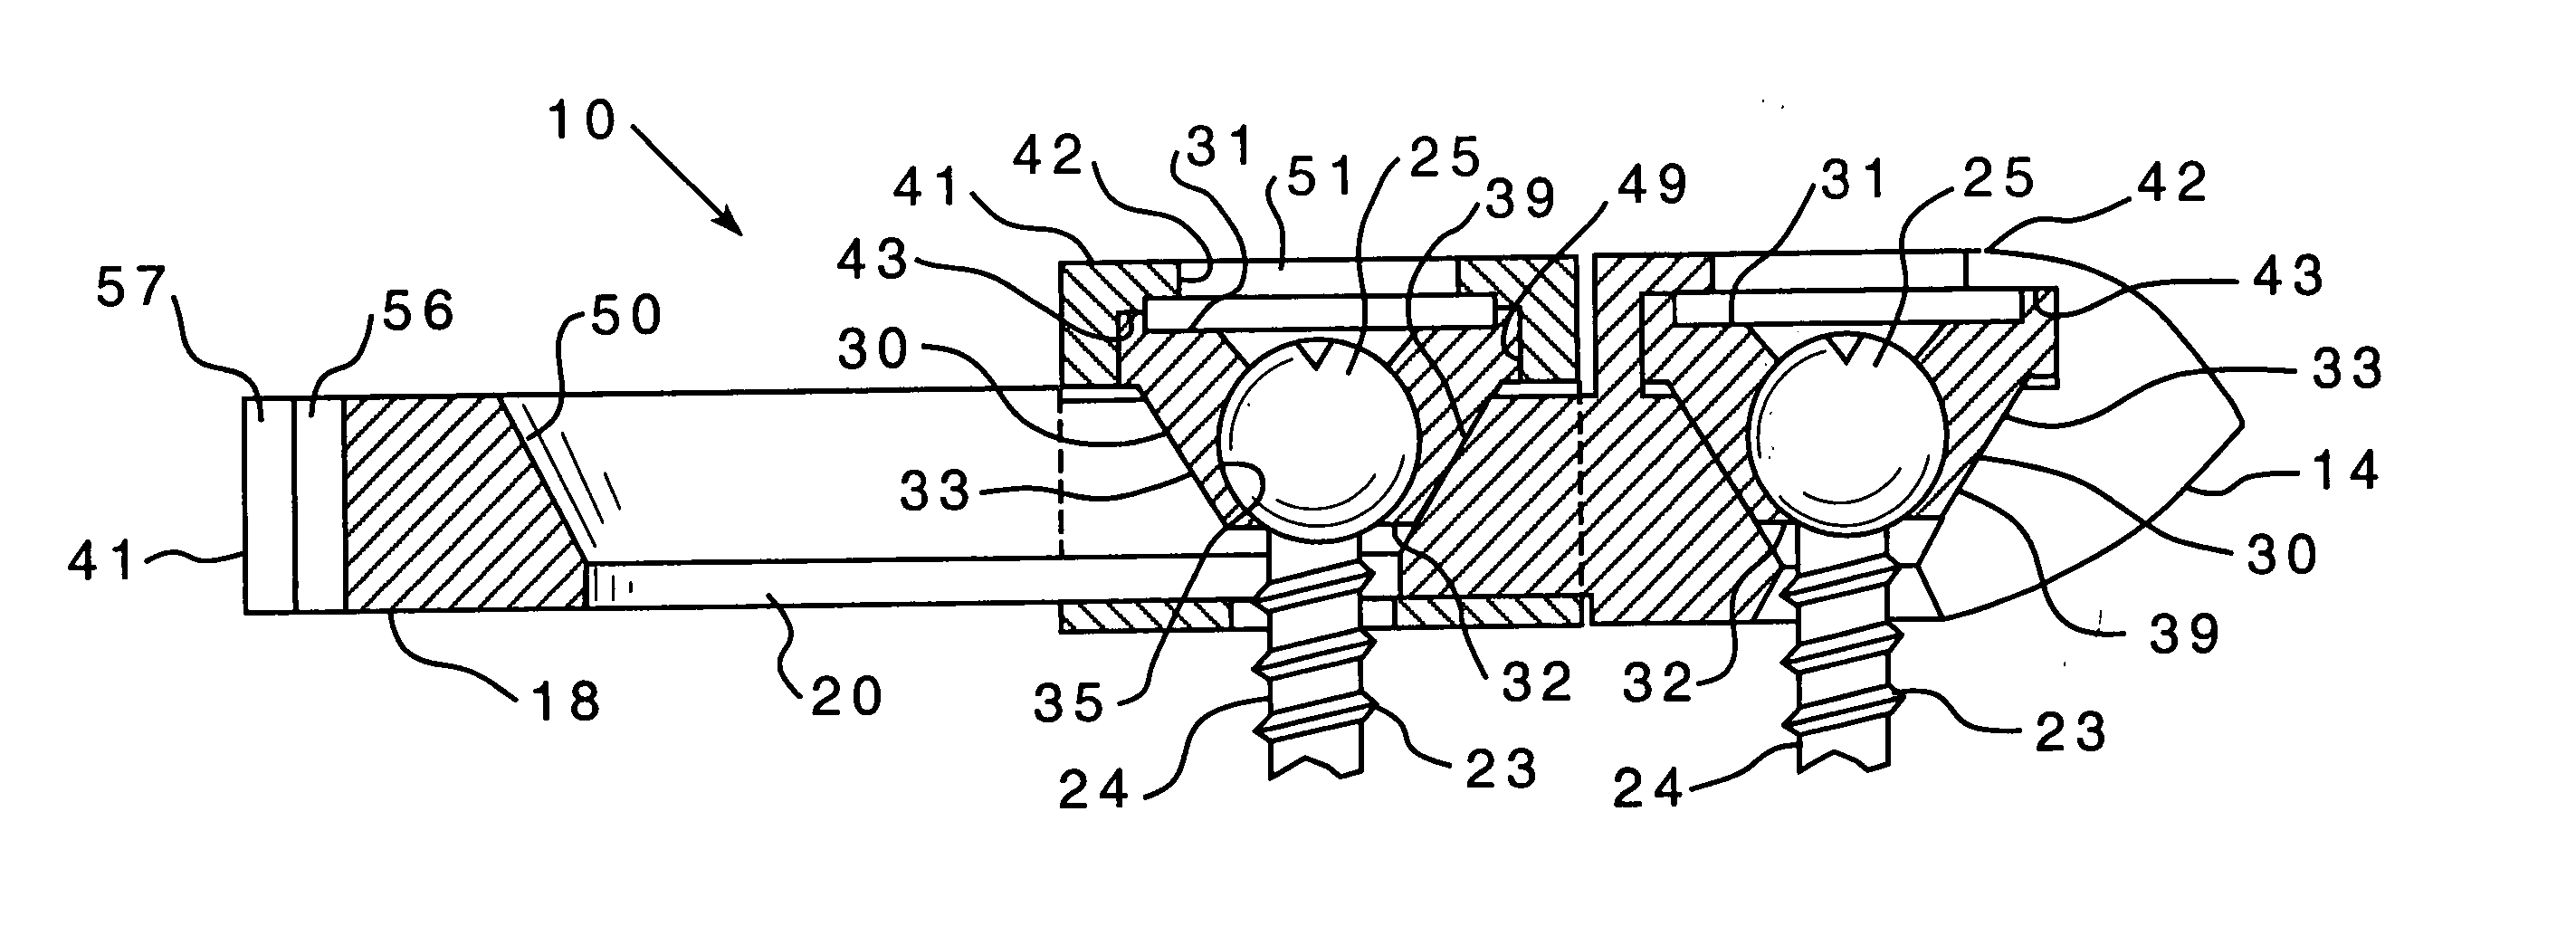 Bone fixation assembly and method of securement